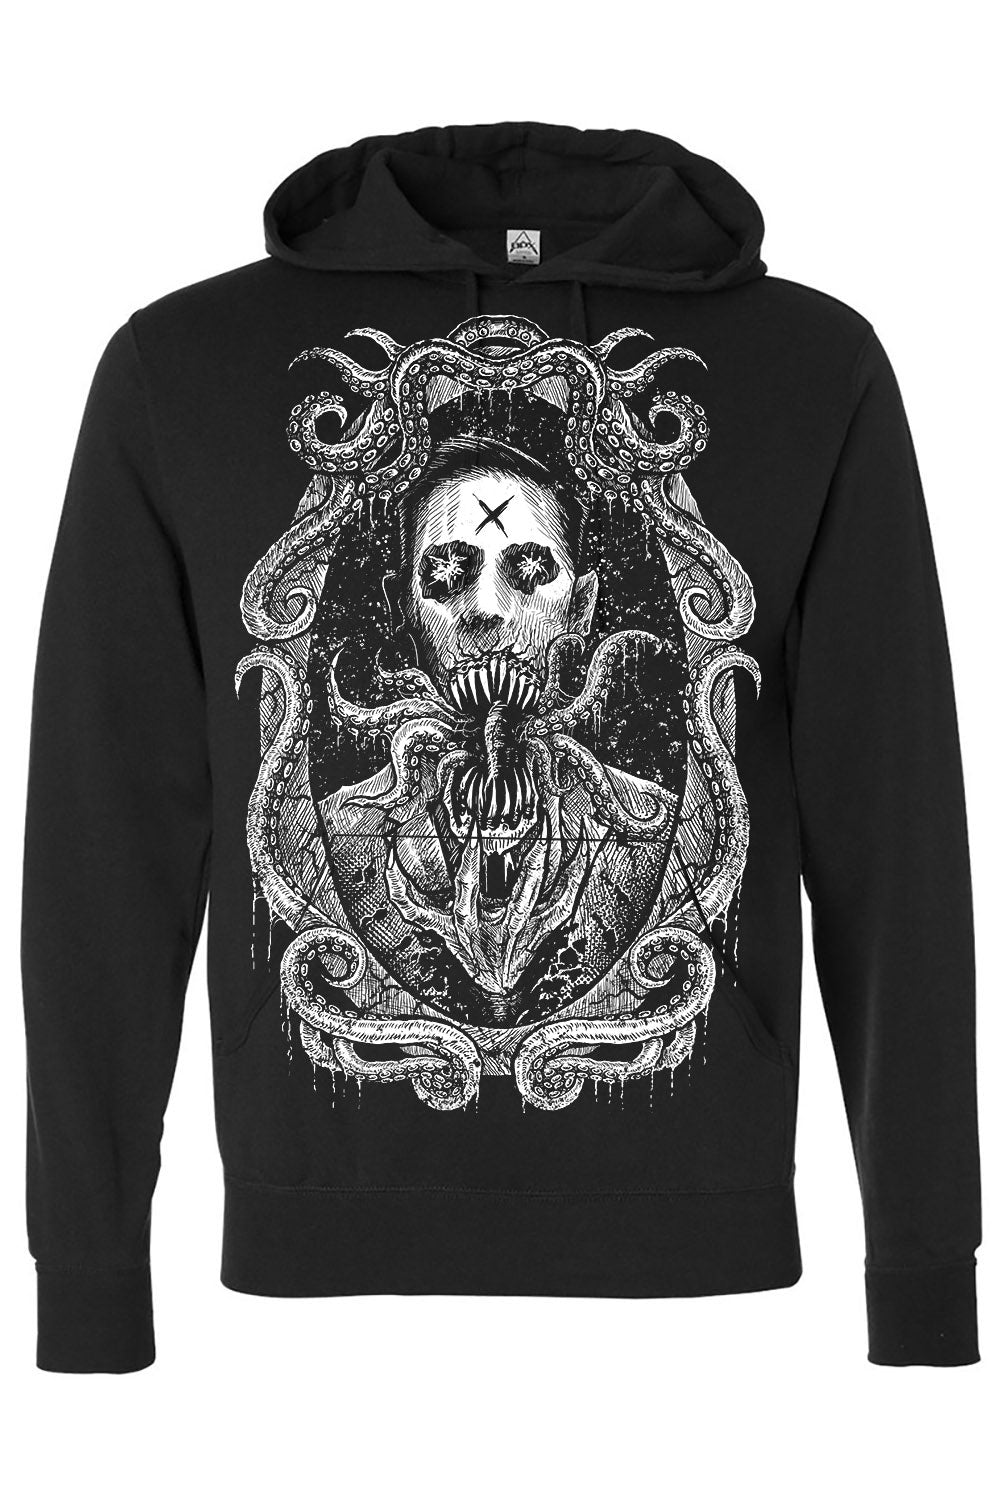 H.P. Lovecraft Hoodie [Zipper or Pullover]